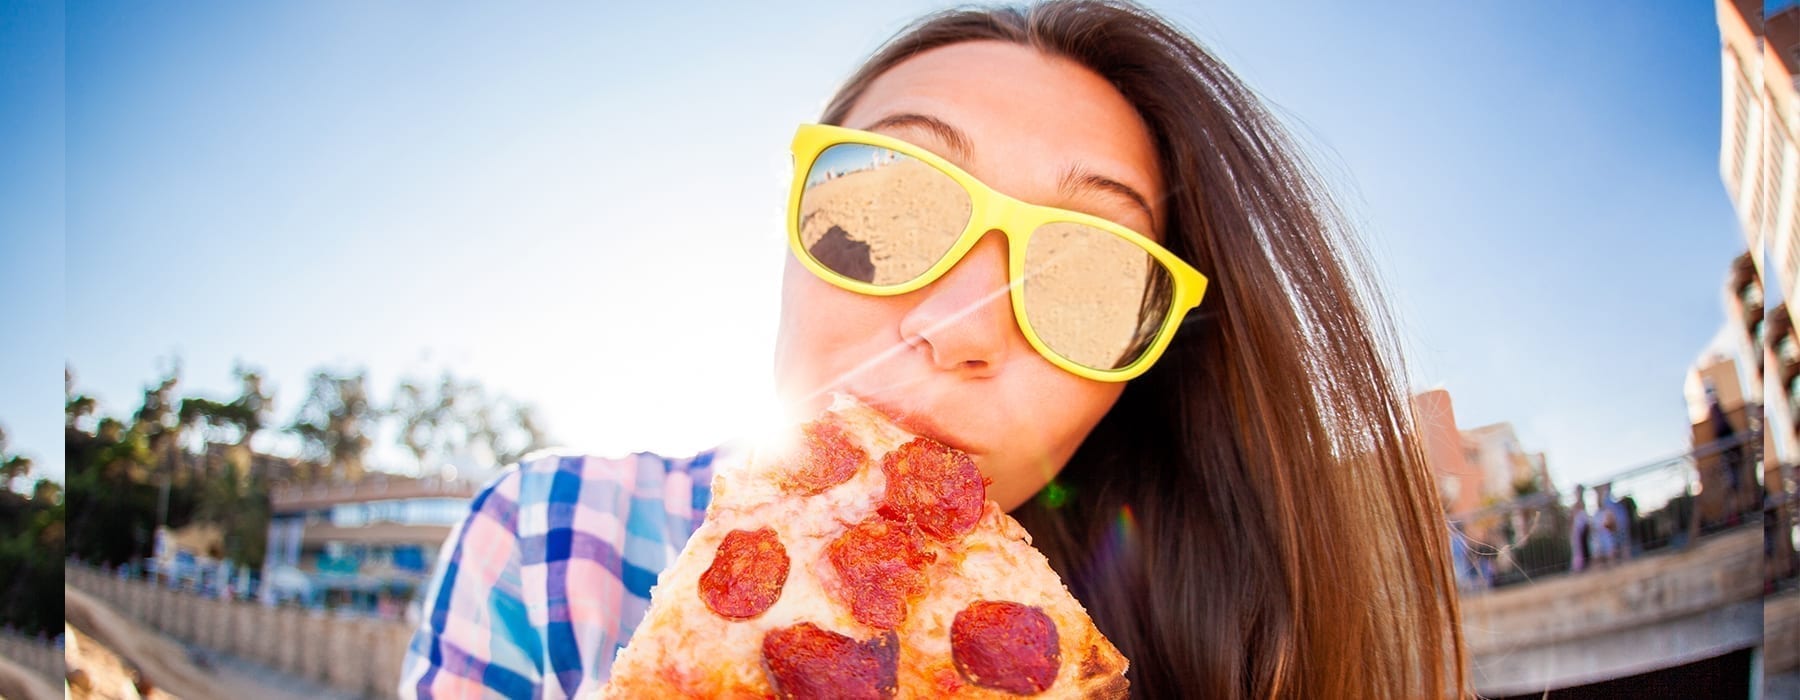 Girl in city eating pizza with sunglasses